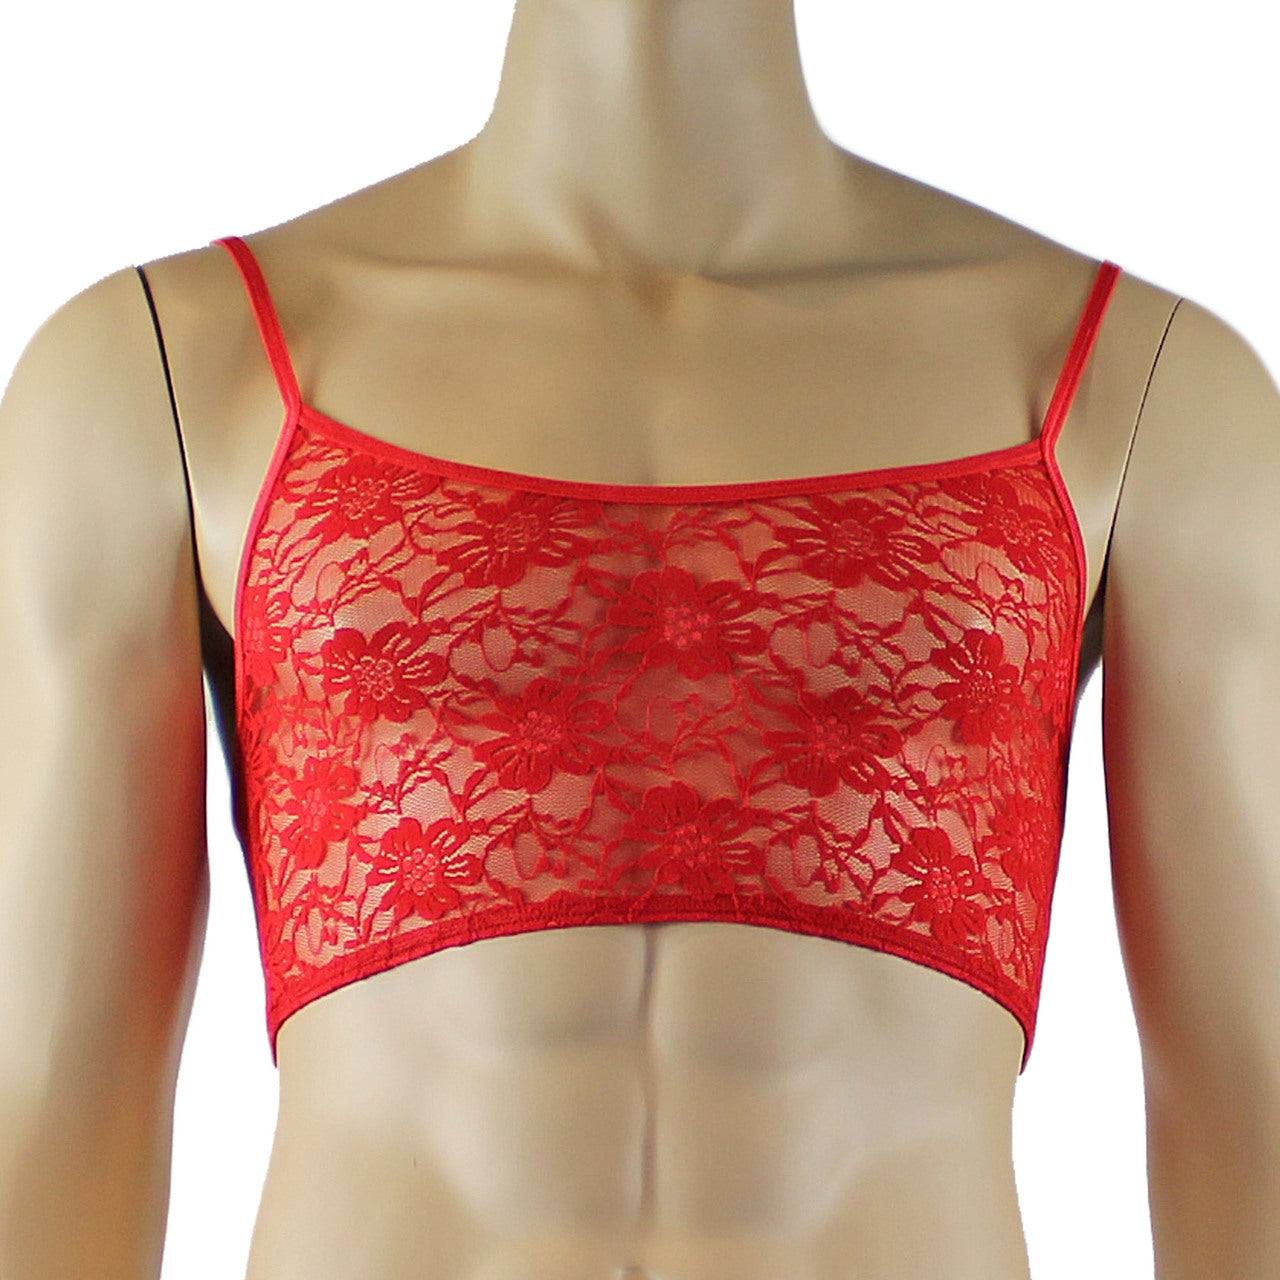 Mens Sexy Lace Crop Bra Top Camisole and Male Lingerie Panty Briefs Red